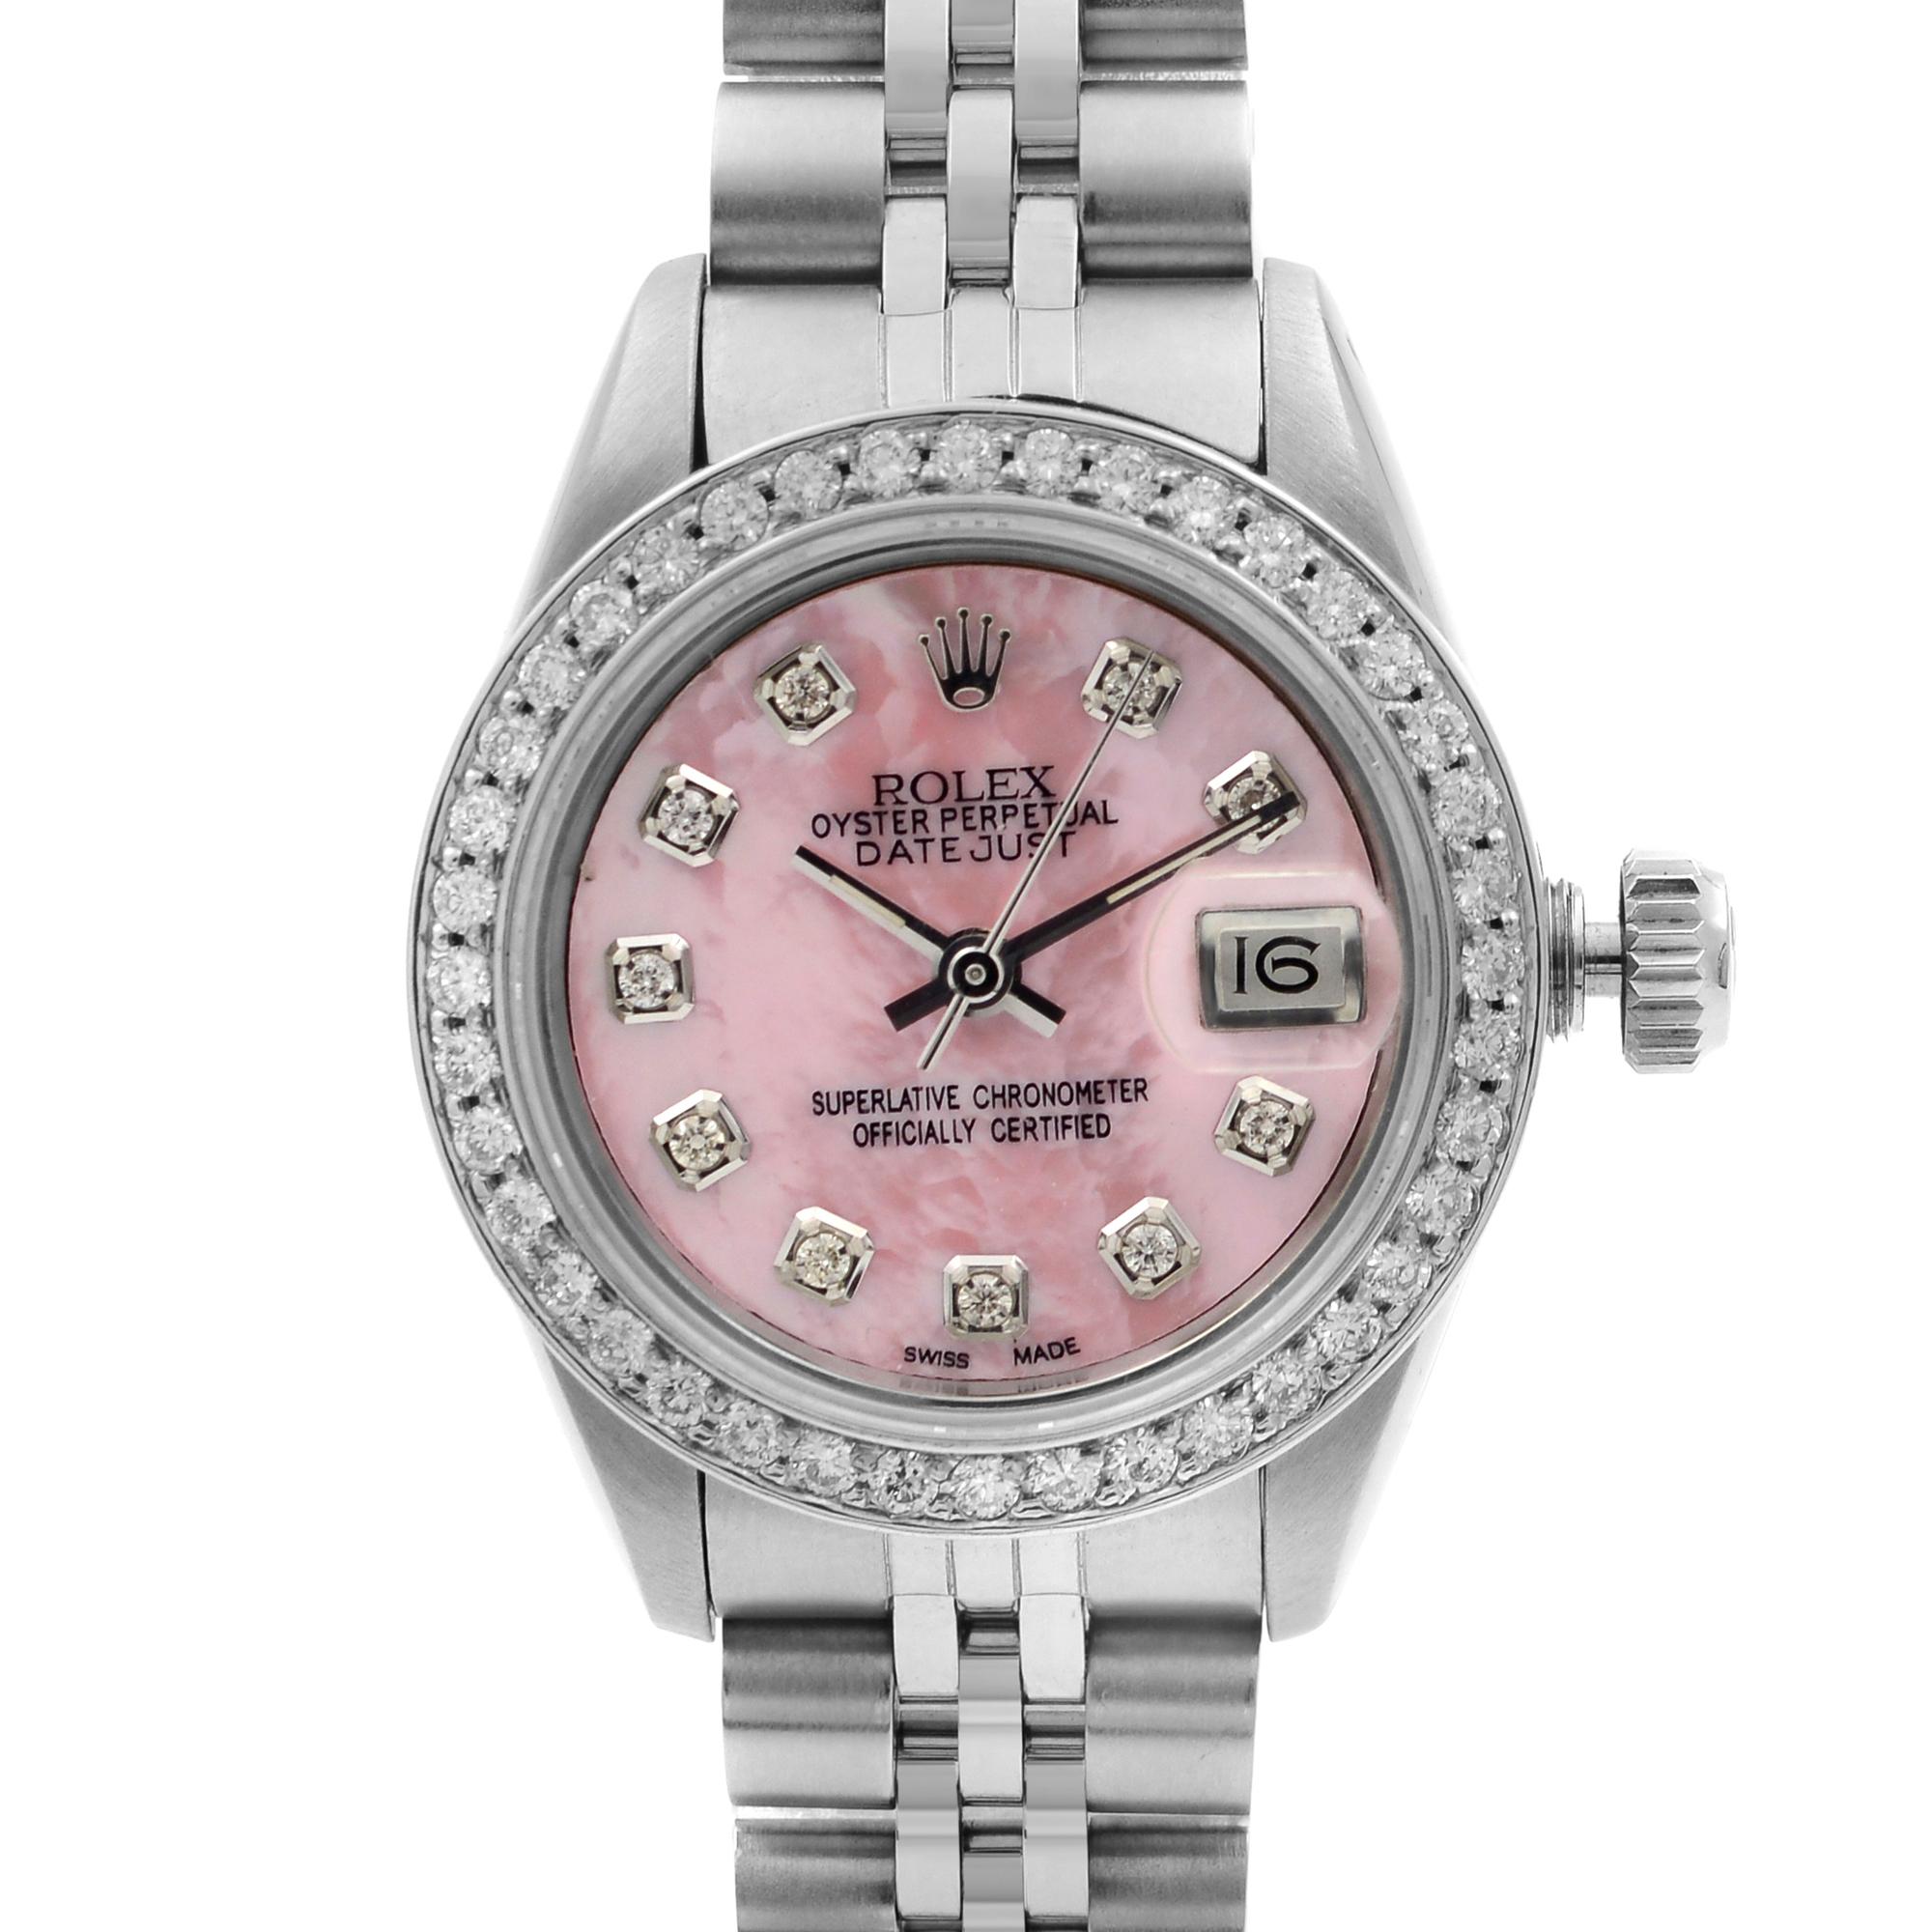 Custom Diamond Bezel and Pink Mother of Pearl dial. 1-Carat diamond bezel. the bracelet has minor slack. Original Box and Papers are not included comes with a Chronostore presentation box and authenticity card. Covered by a one-year Chronostore